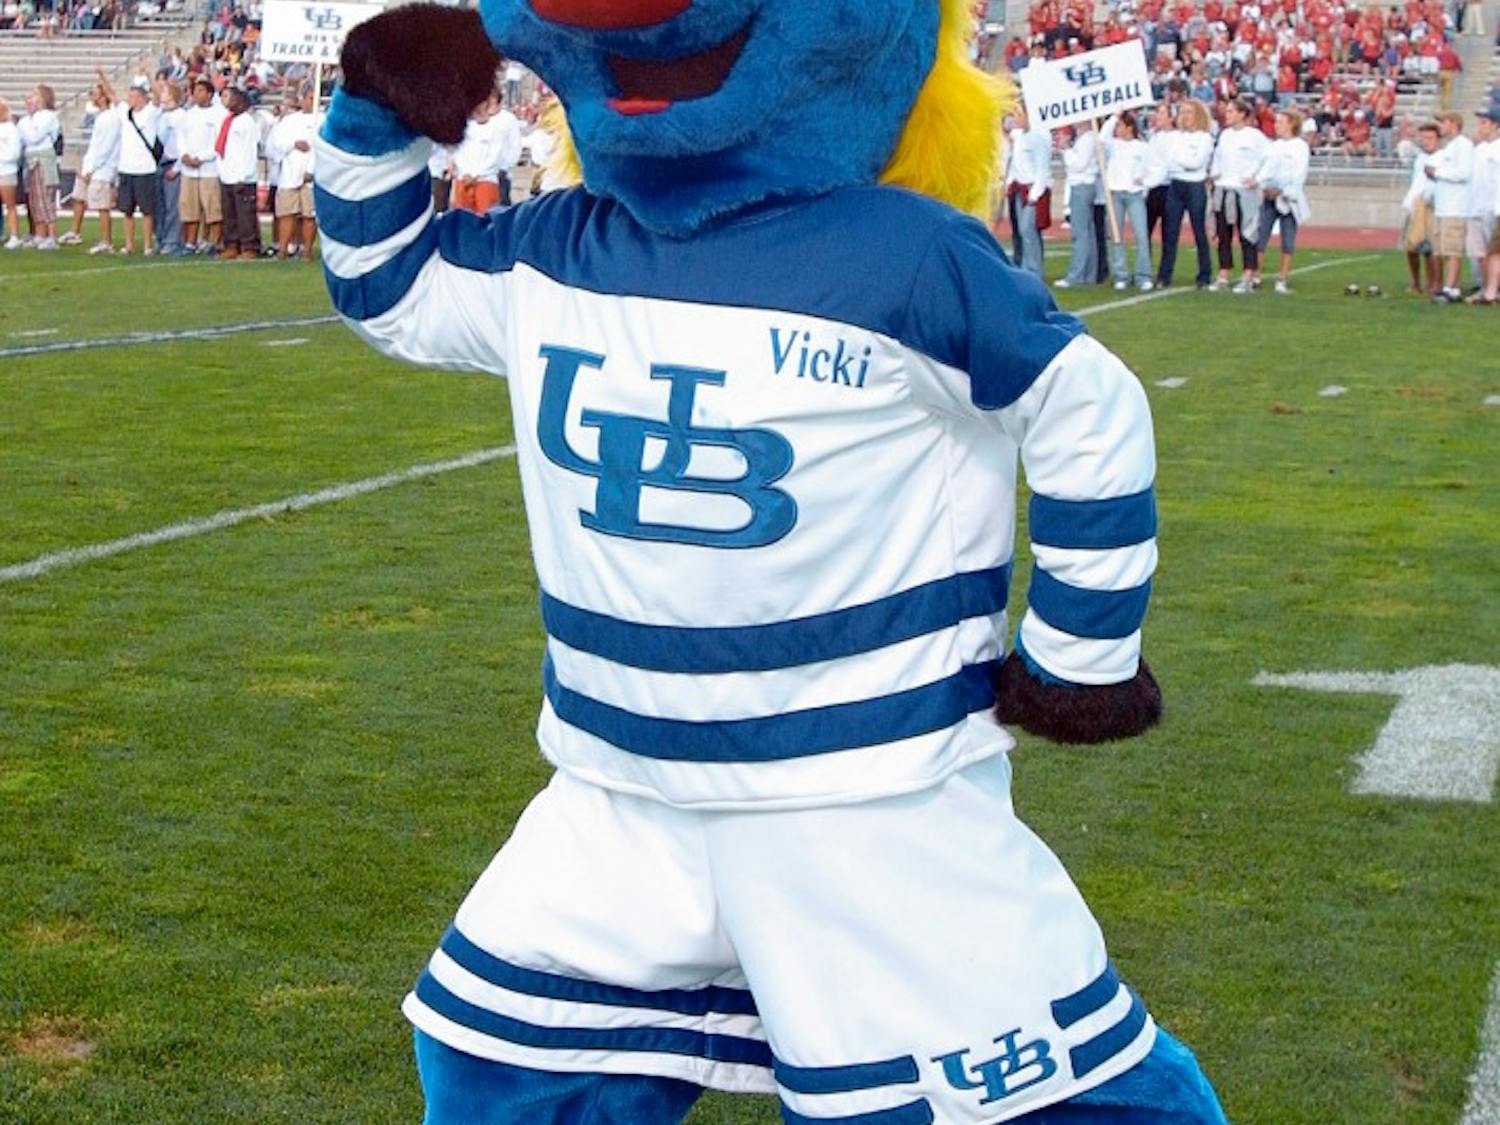 Victoria S. Bull flexes her muscles during her first appearance at a UB Football game against the Rutgers Scarlet Knights in Aug. 2001. Victoria debuted during the 2001-02 academic year, but fans have not seen Victoria in roughly eight years.